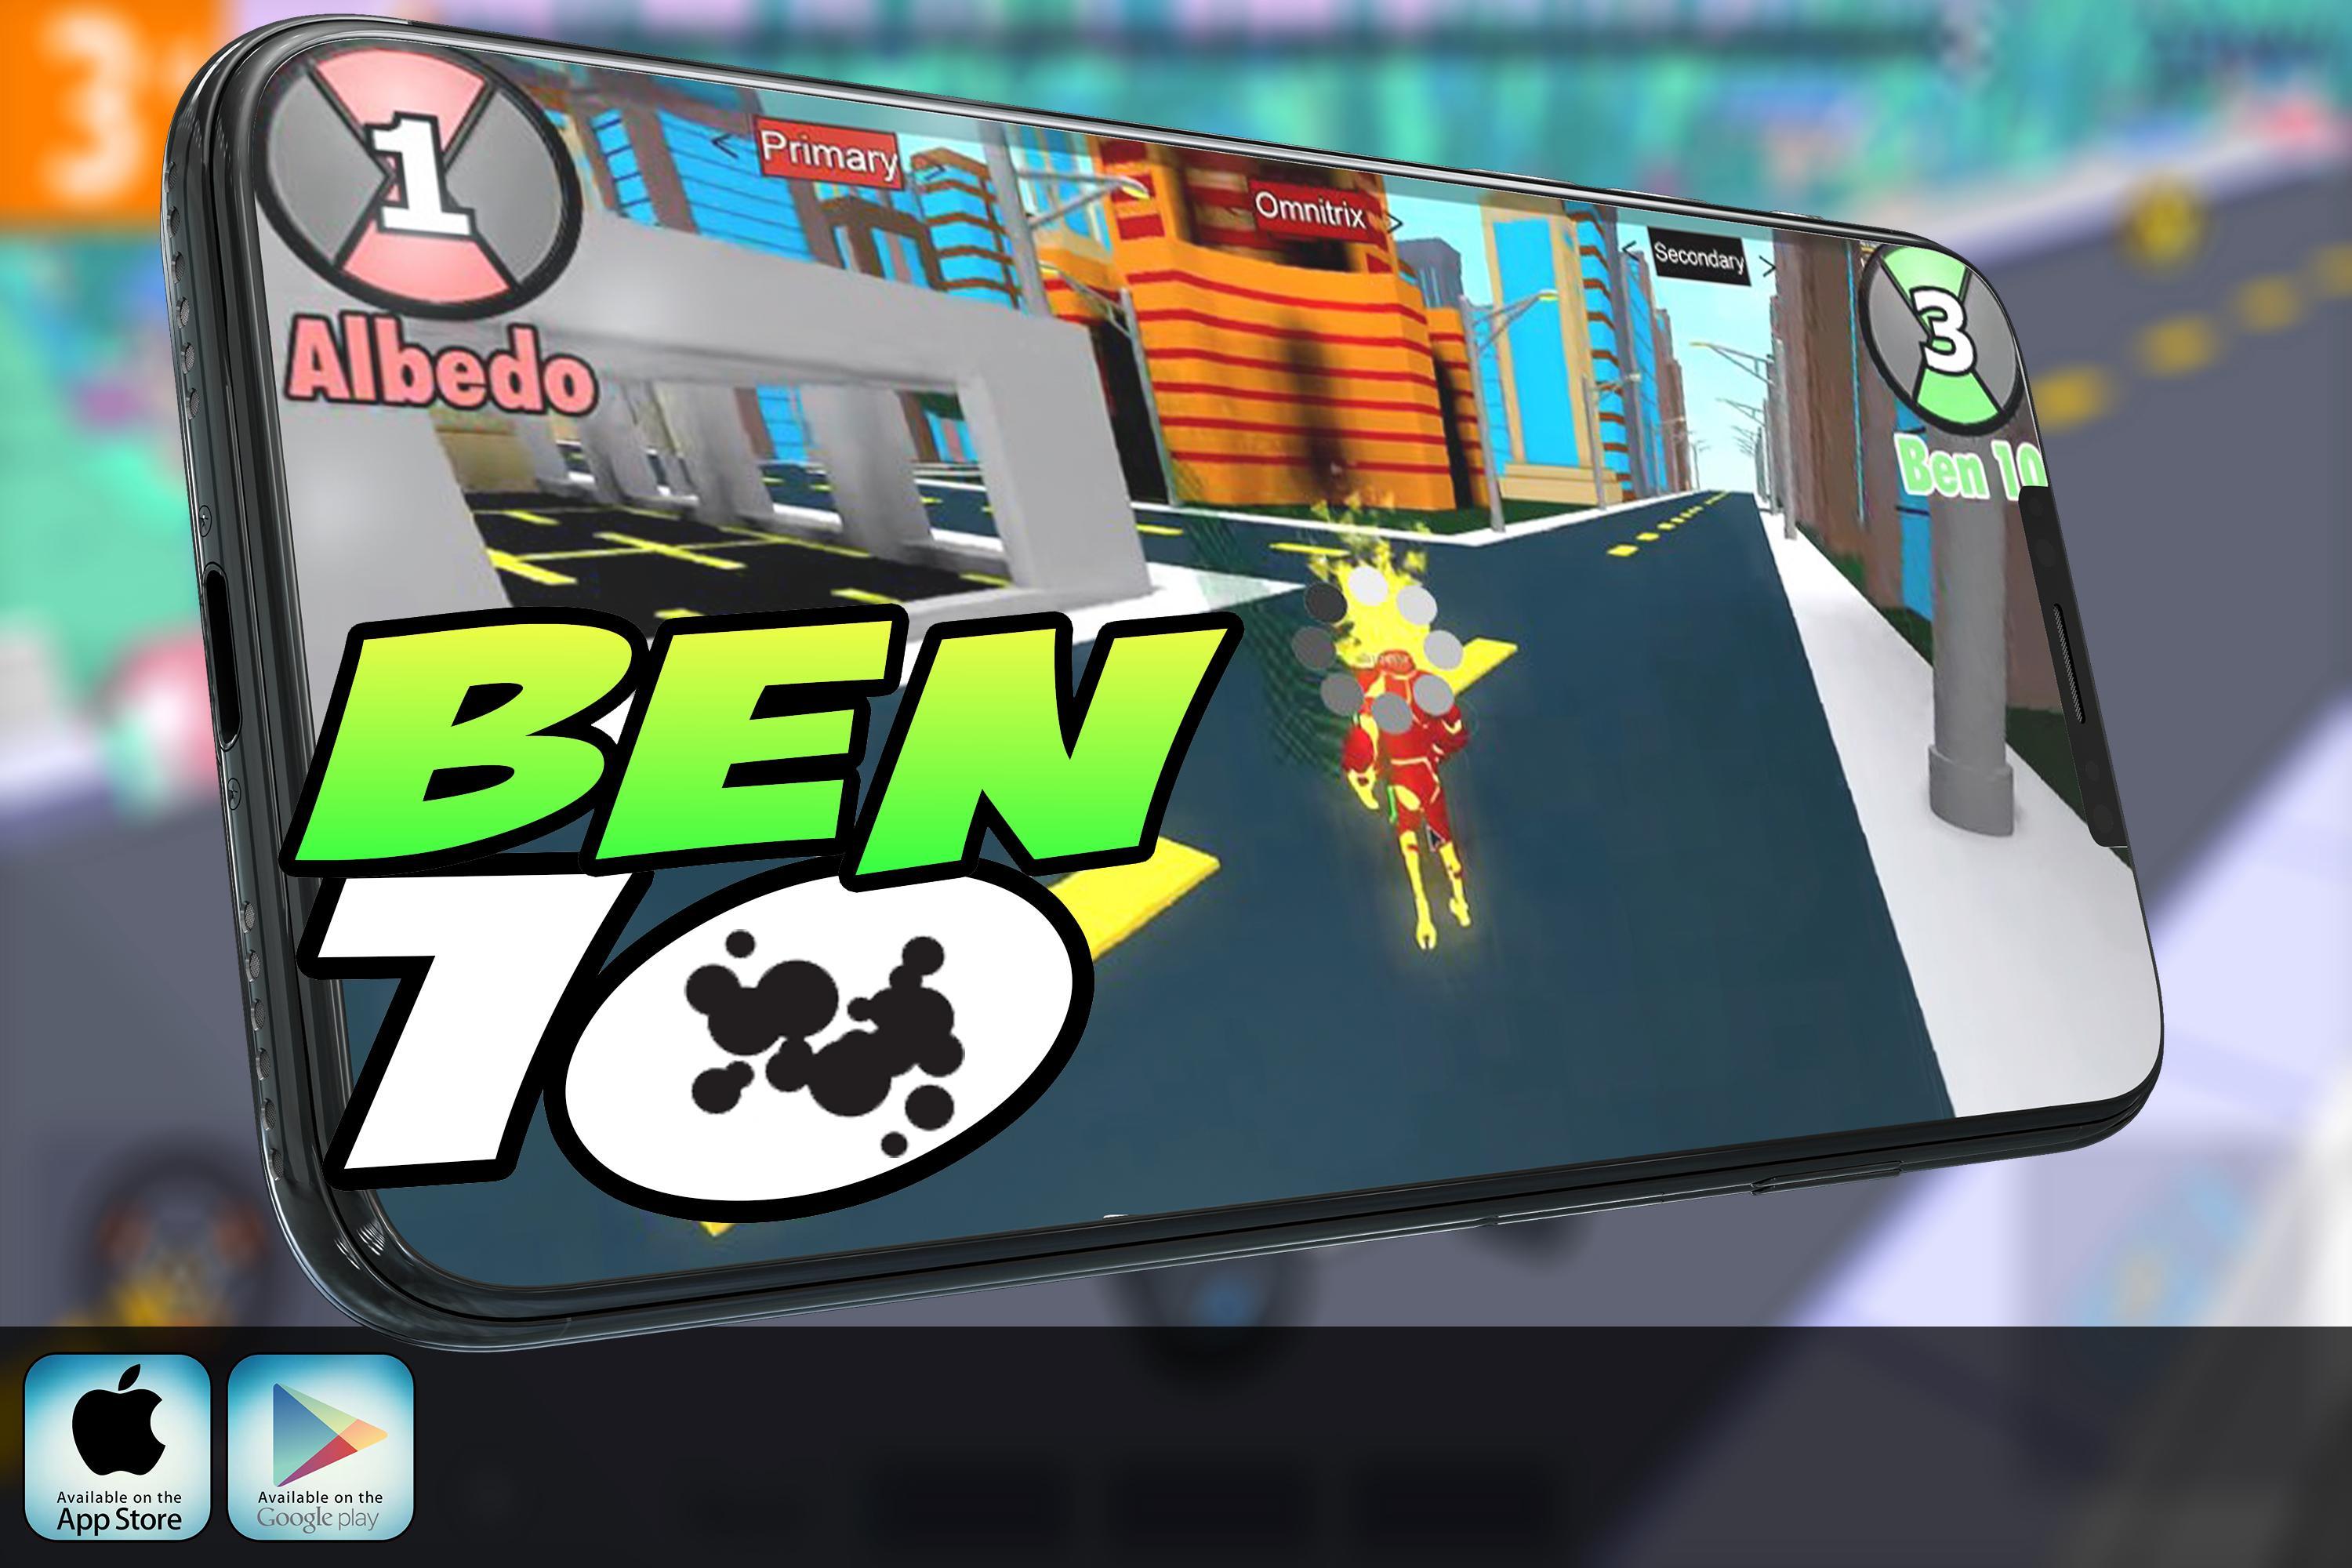 Tips For Evil Ben 10 Roblox For Android Apk Download - guide expert ben 10 evil ben 10 roblox 1 0 latest apk download